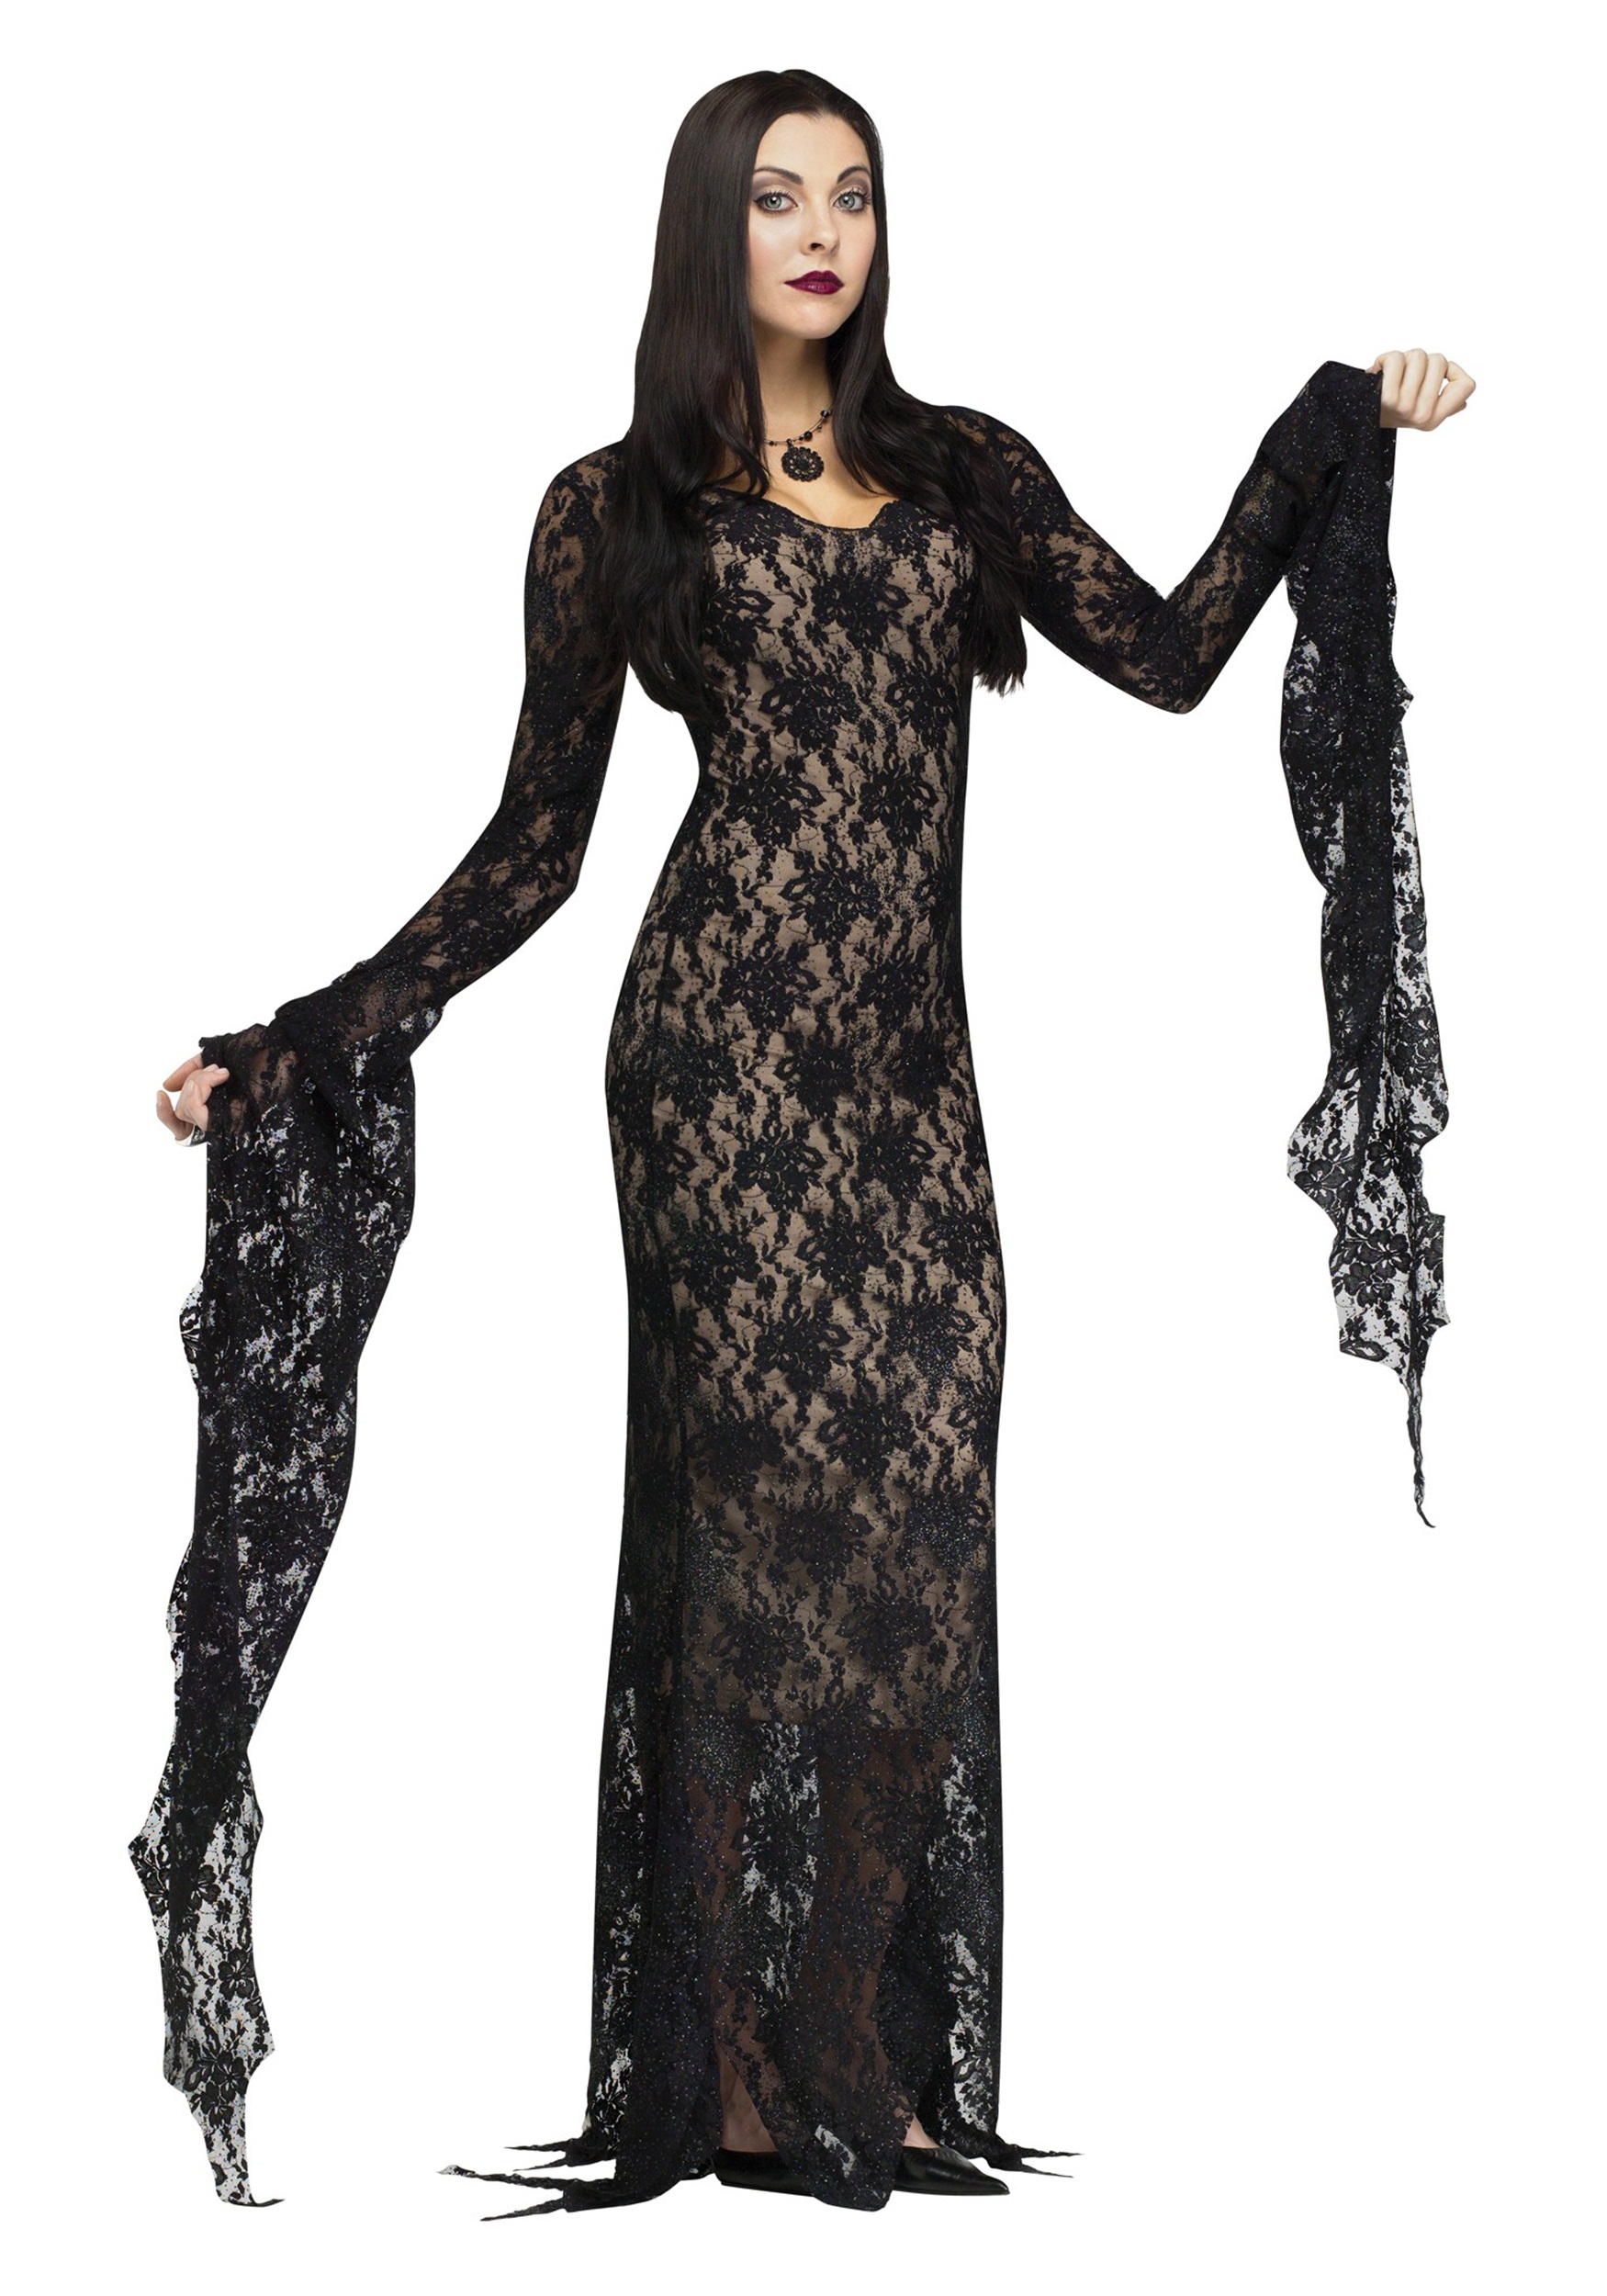 Image of Lace Miss Darkness Adult Costume ID FU124044-M